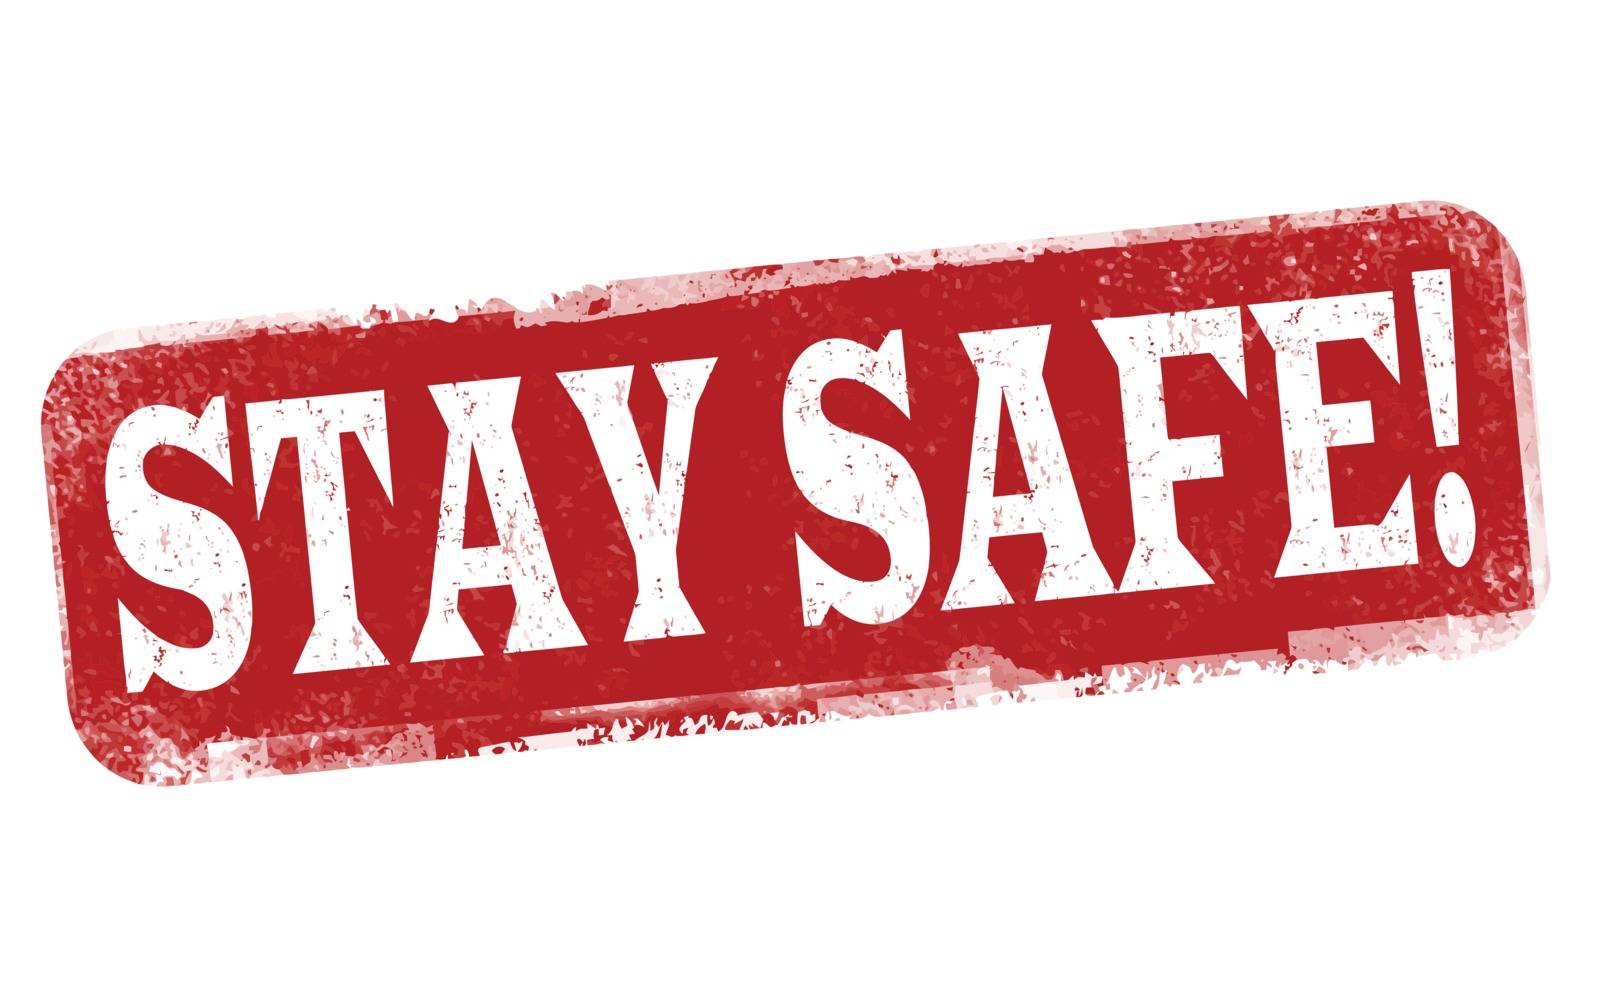 Stay safe sign or stamp by roxanabalint